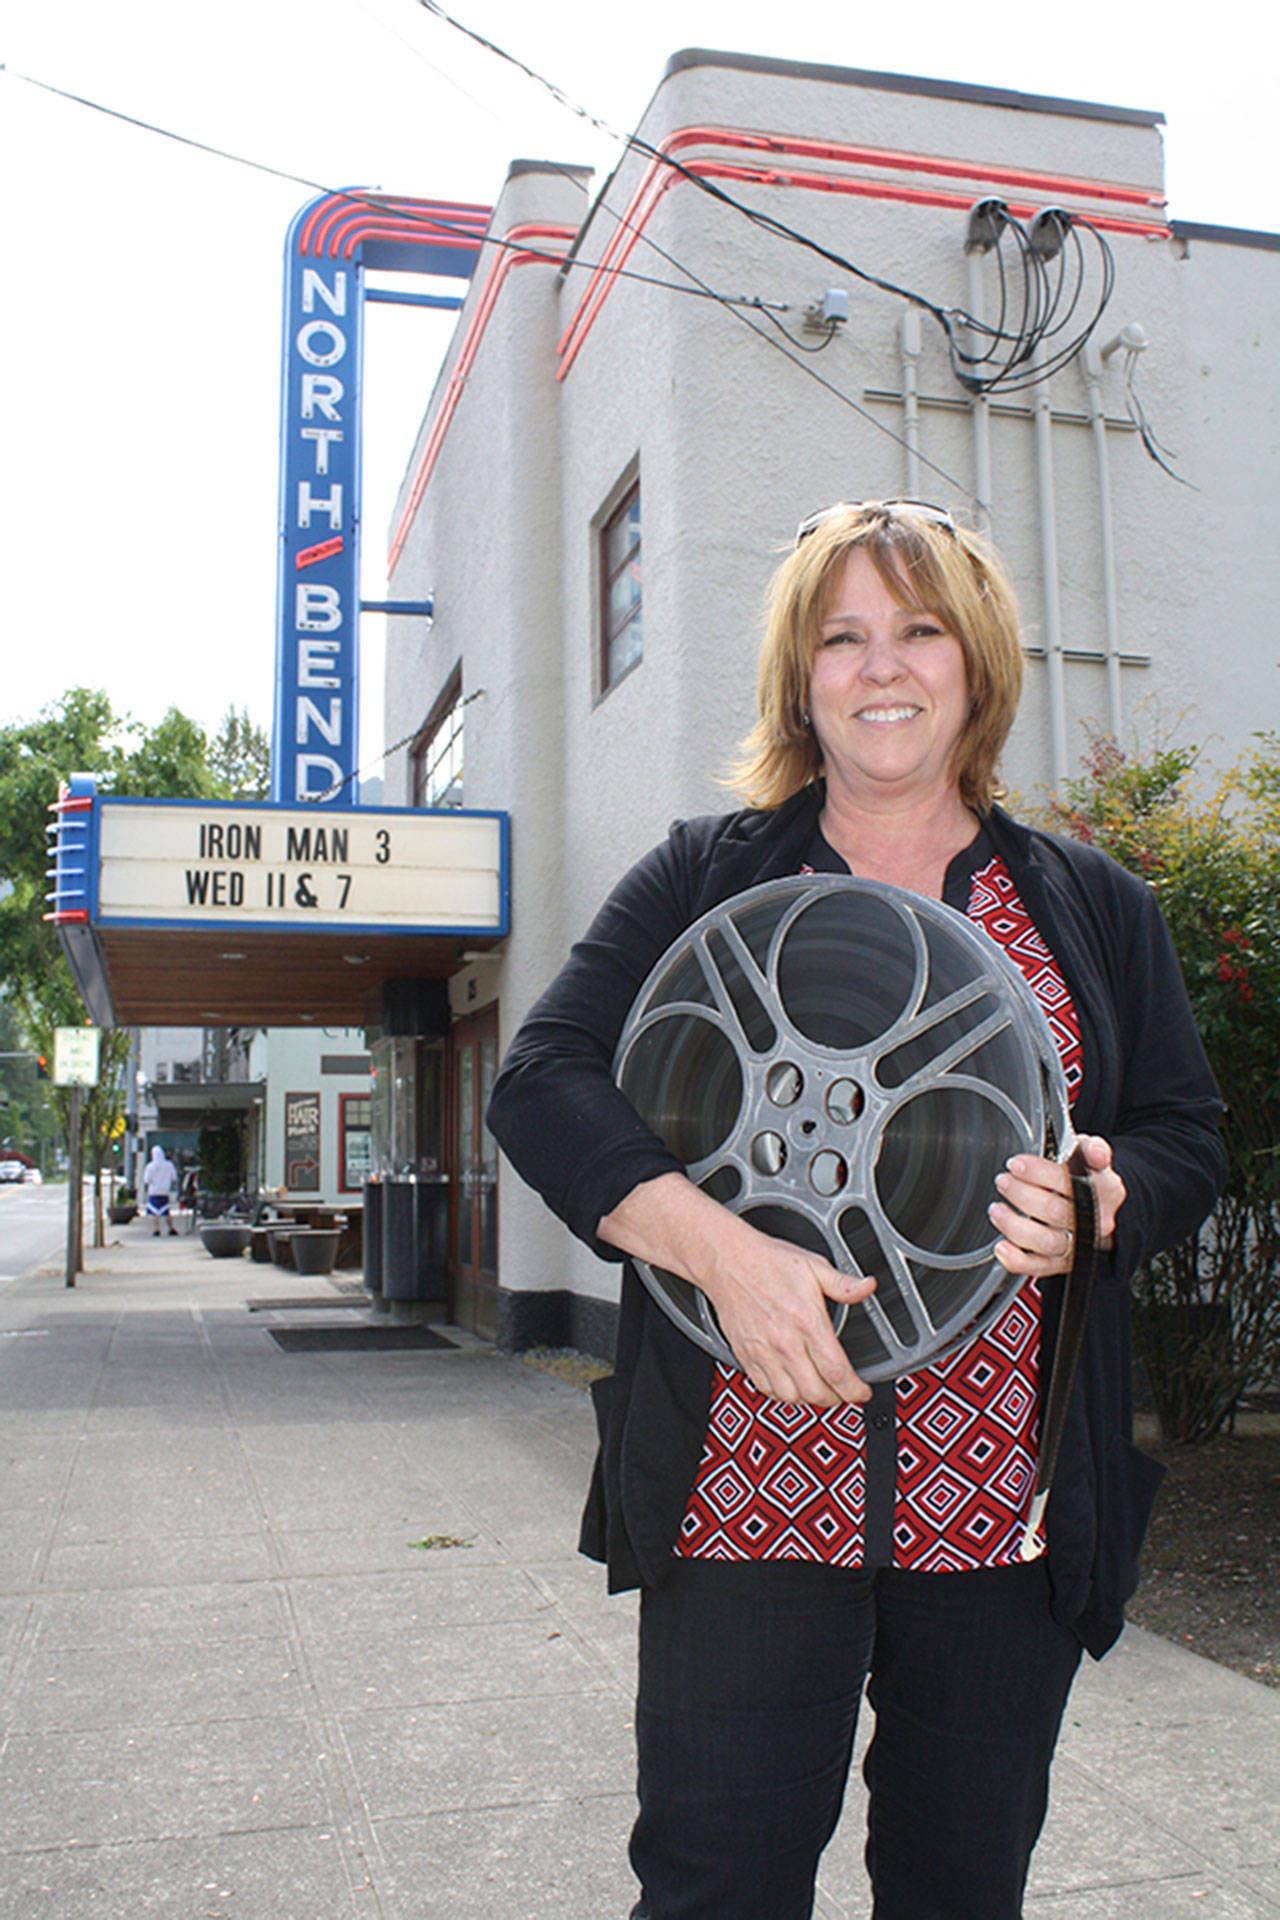 North Bend Theatre owner Cindy Walker is pictured here in 2013, as the theater prepared to fundraise for a digital projection transformation project. Through a community-supported crowdfunding project, the Walkers were able to raise $75,000 of the $100,000 cost of the transition. (Record file photo)